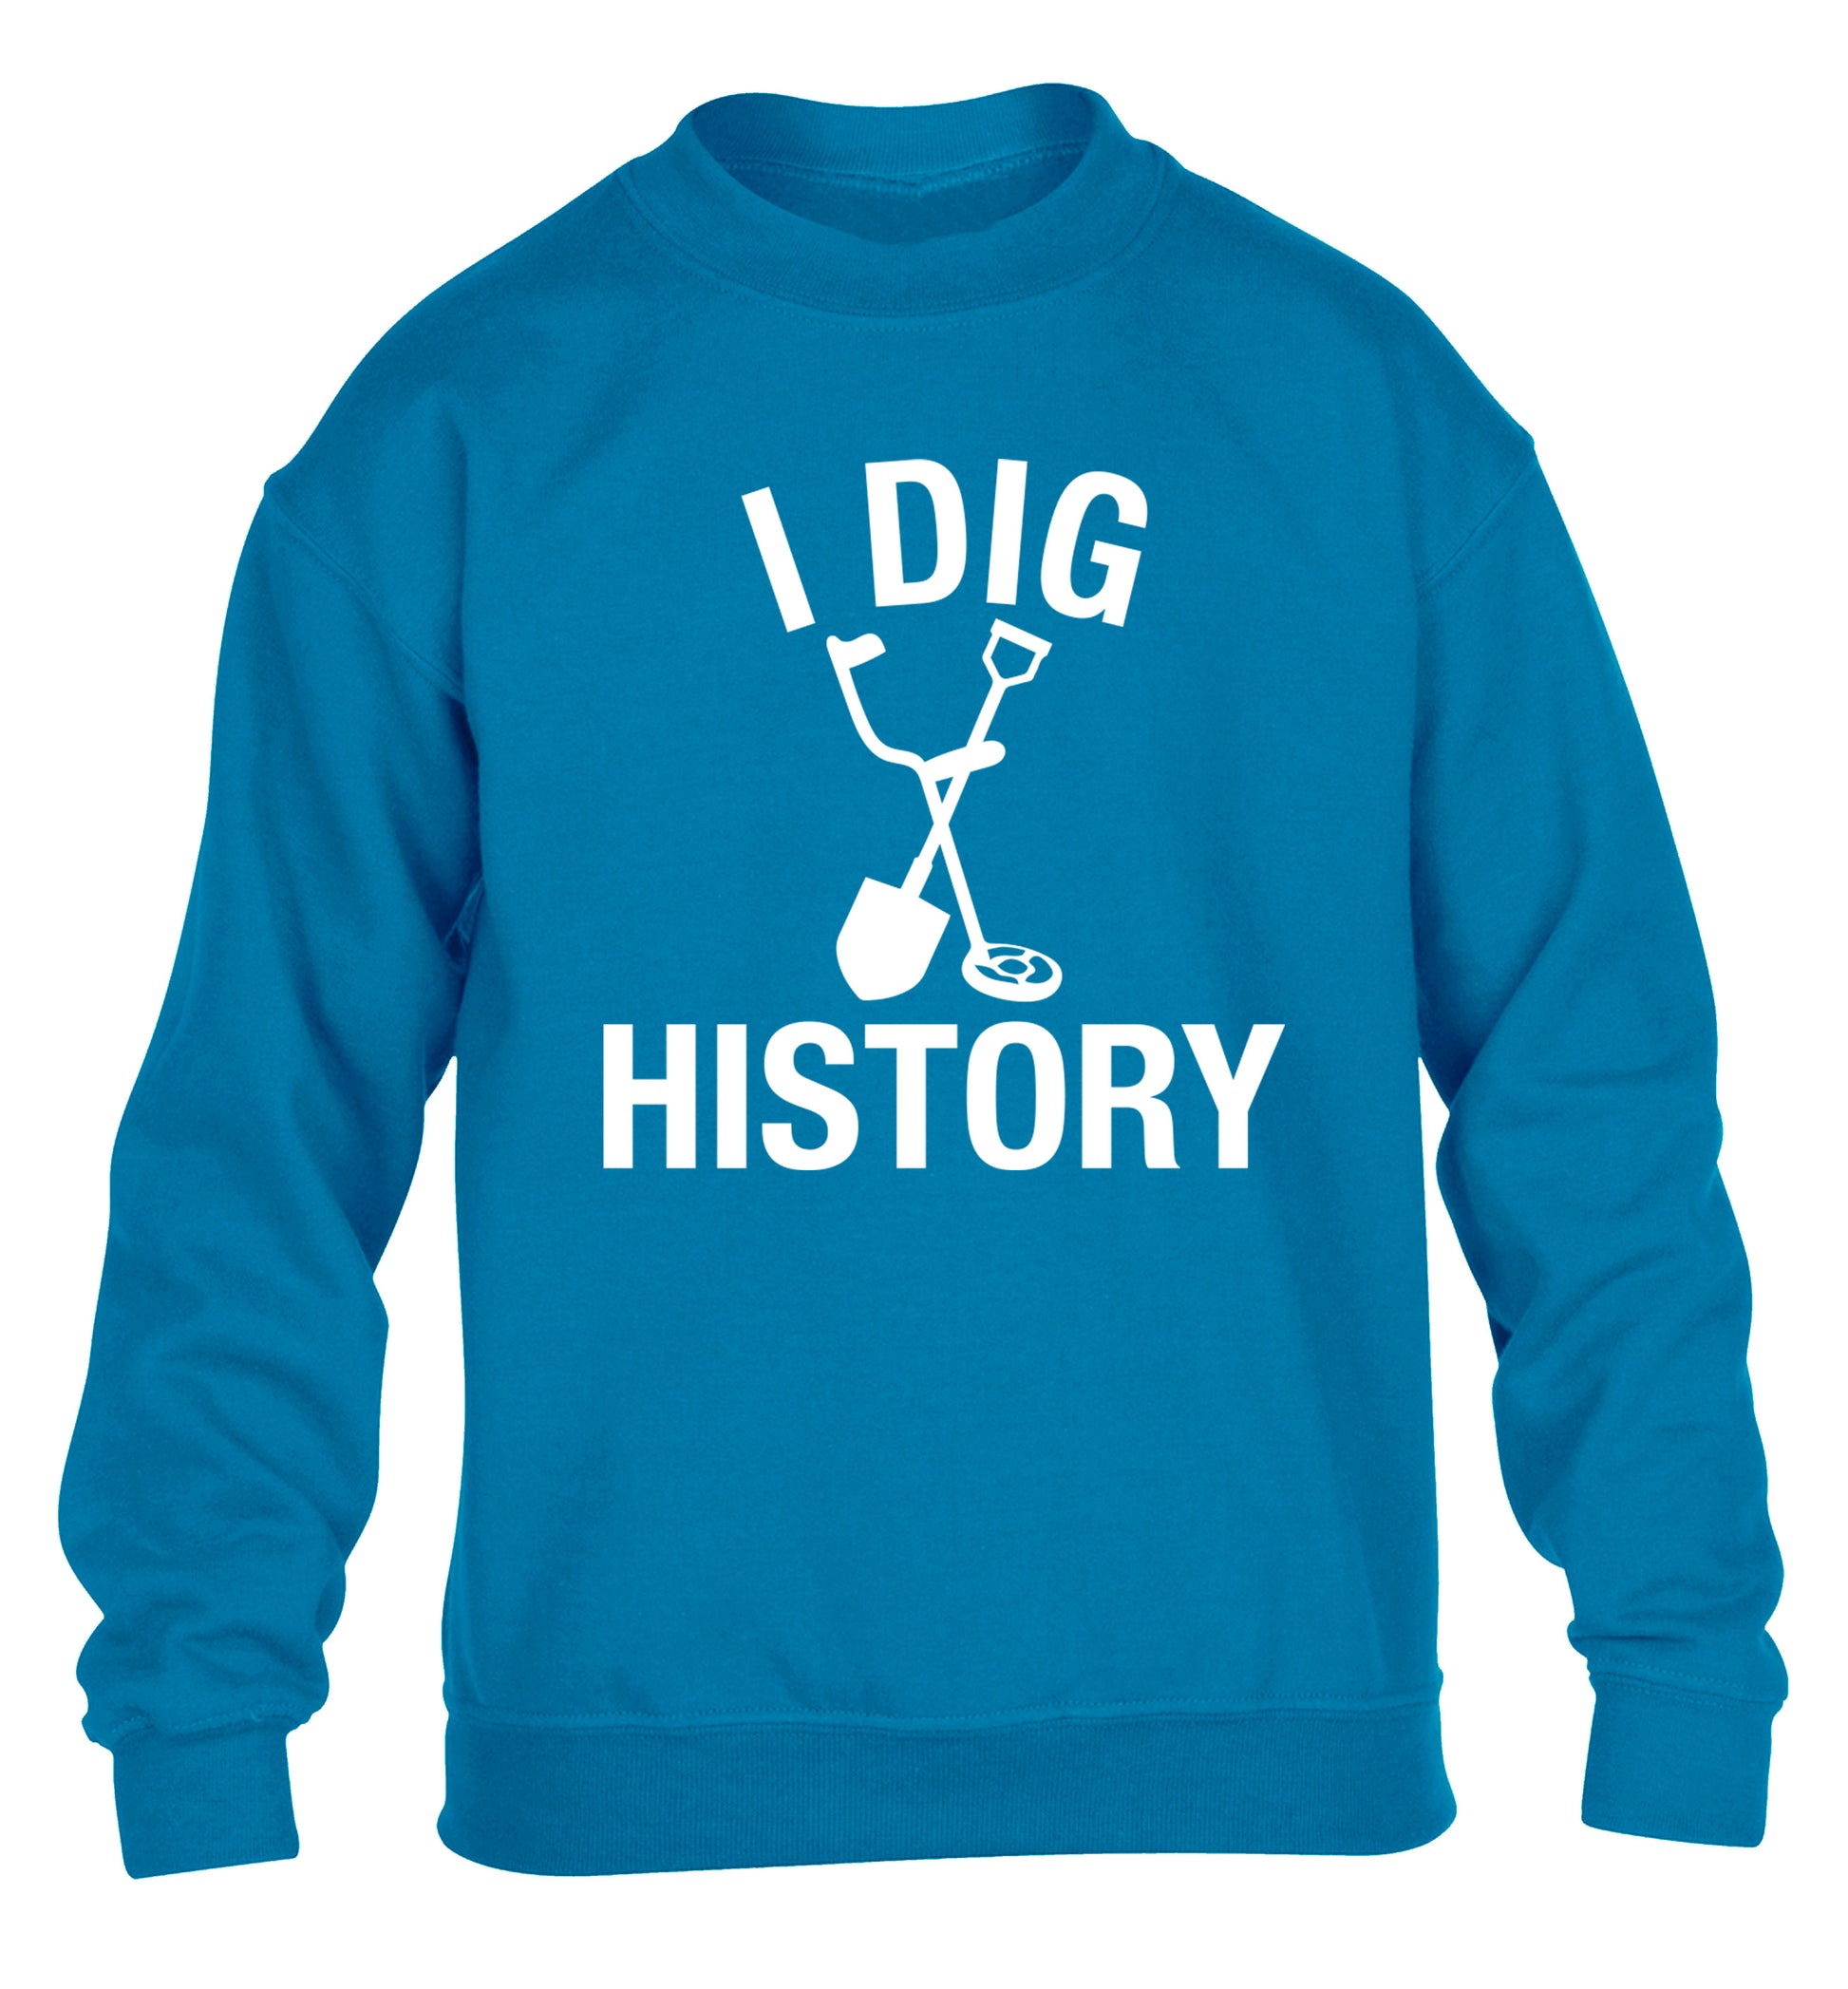 I dig history children's blue sweater 12-13 Years